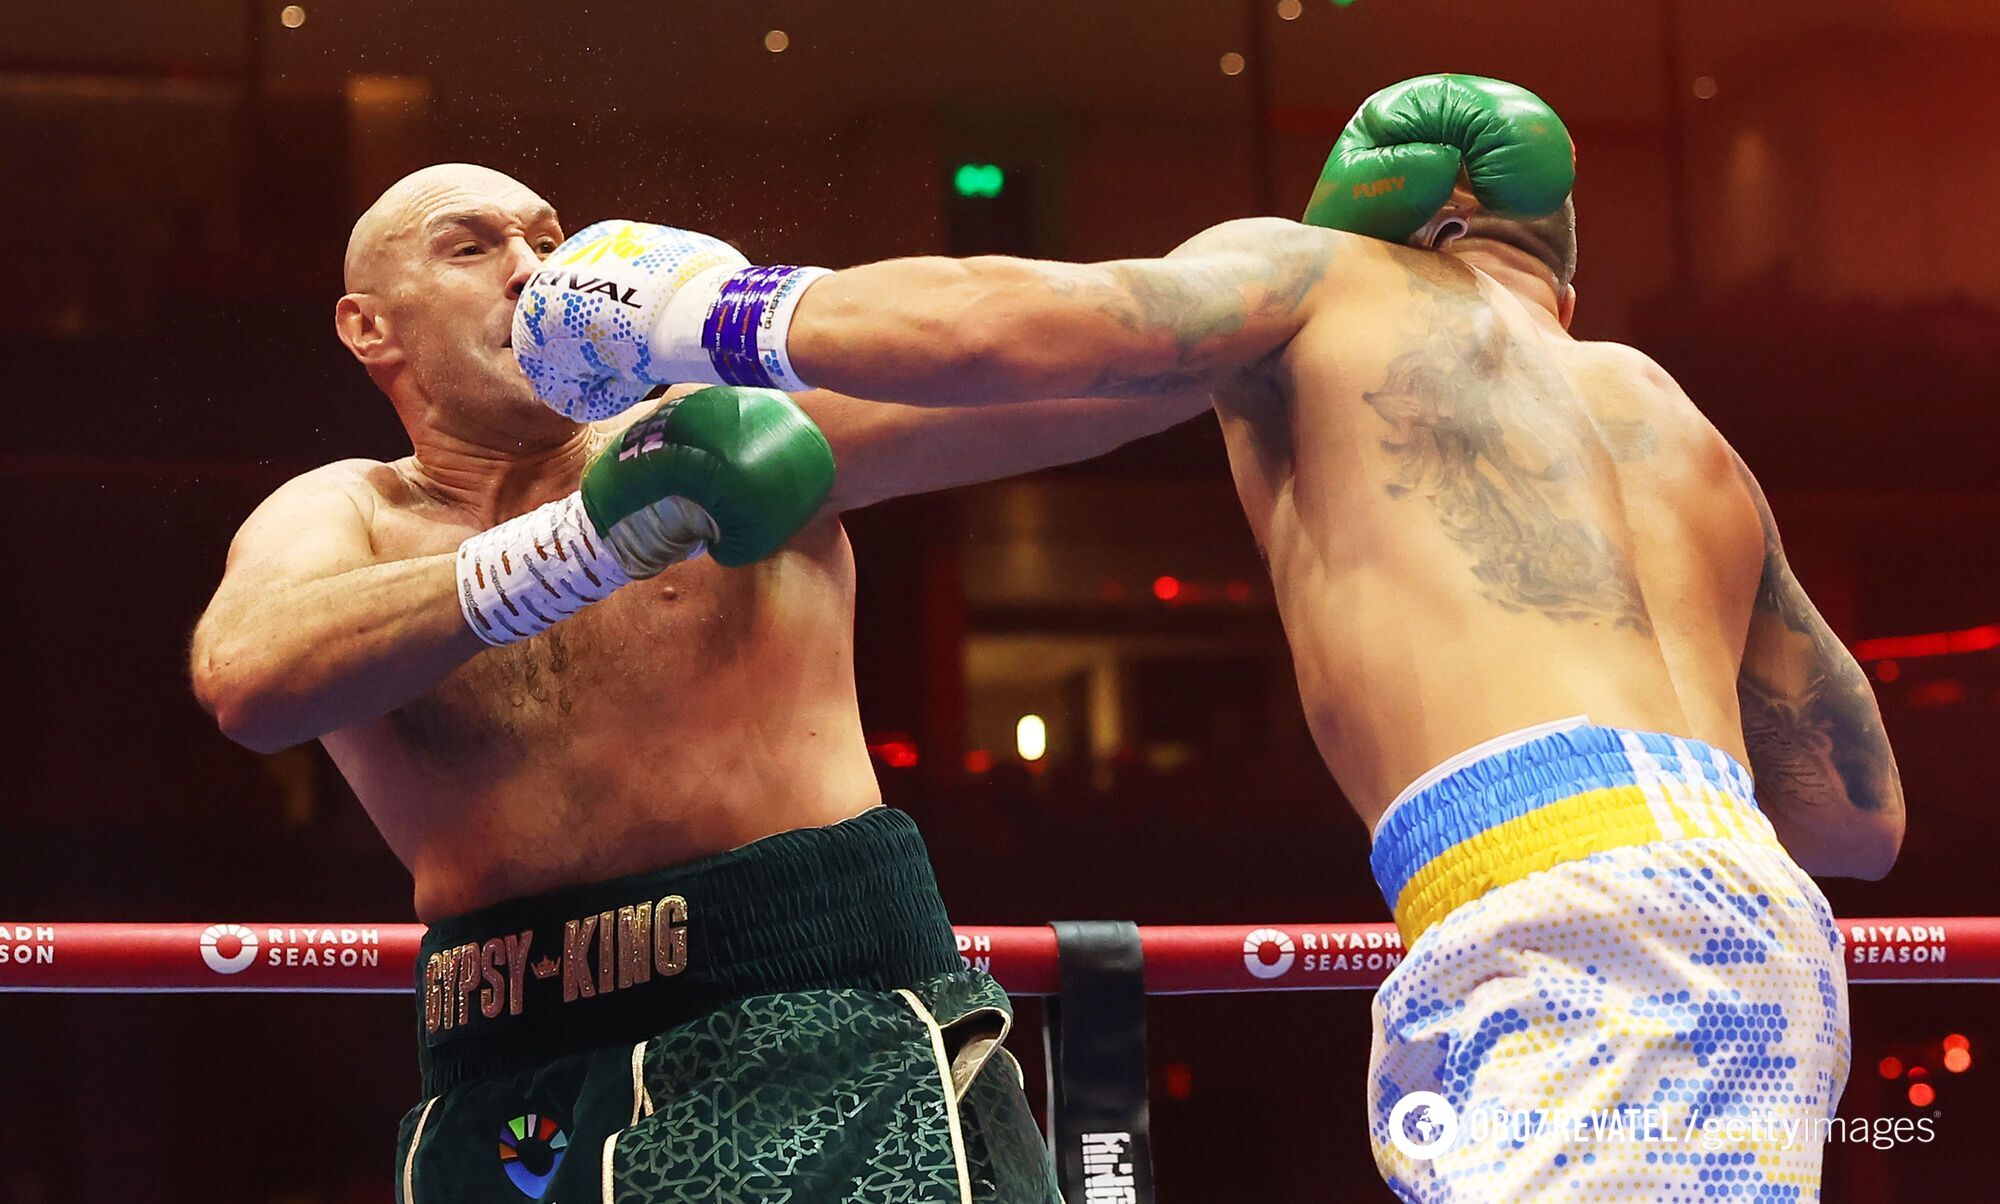 The first in history! Usyk defeats Fury and becomes the absolute heavyweight champion